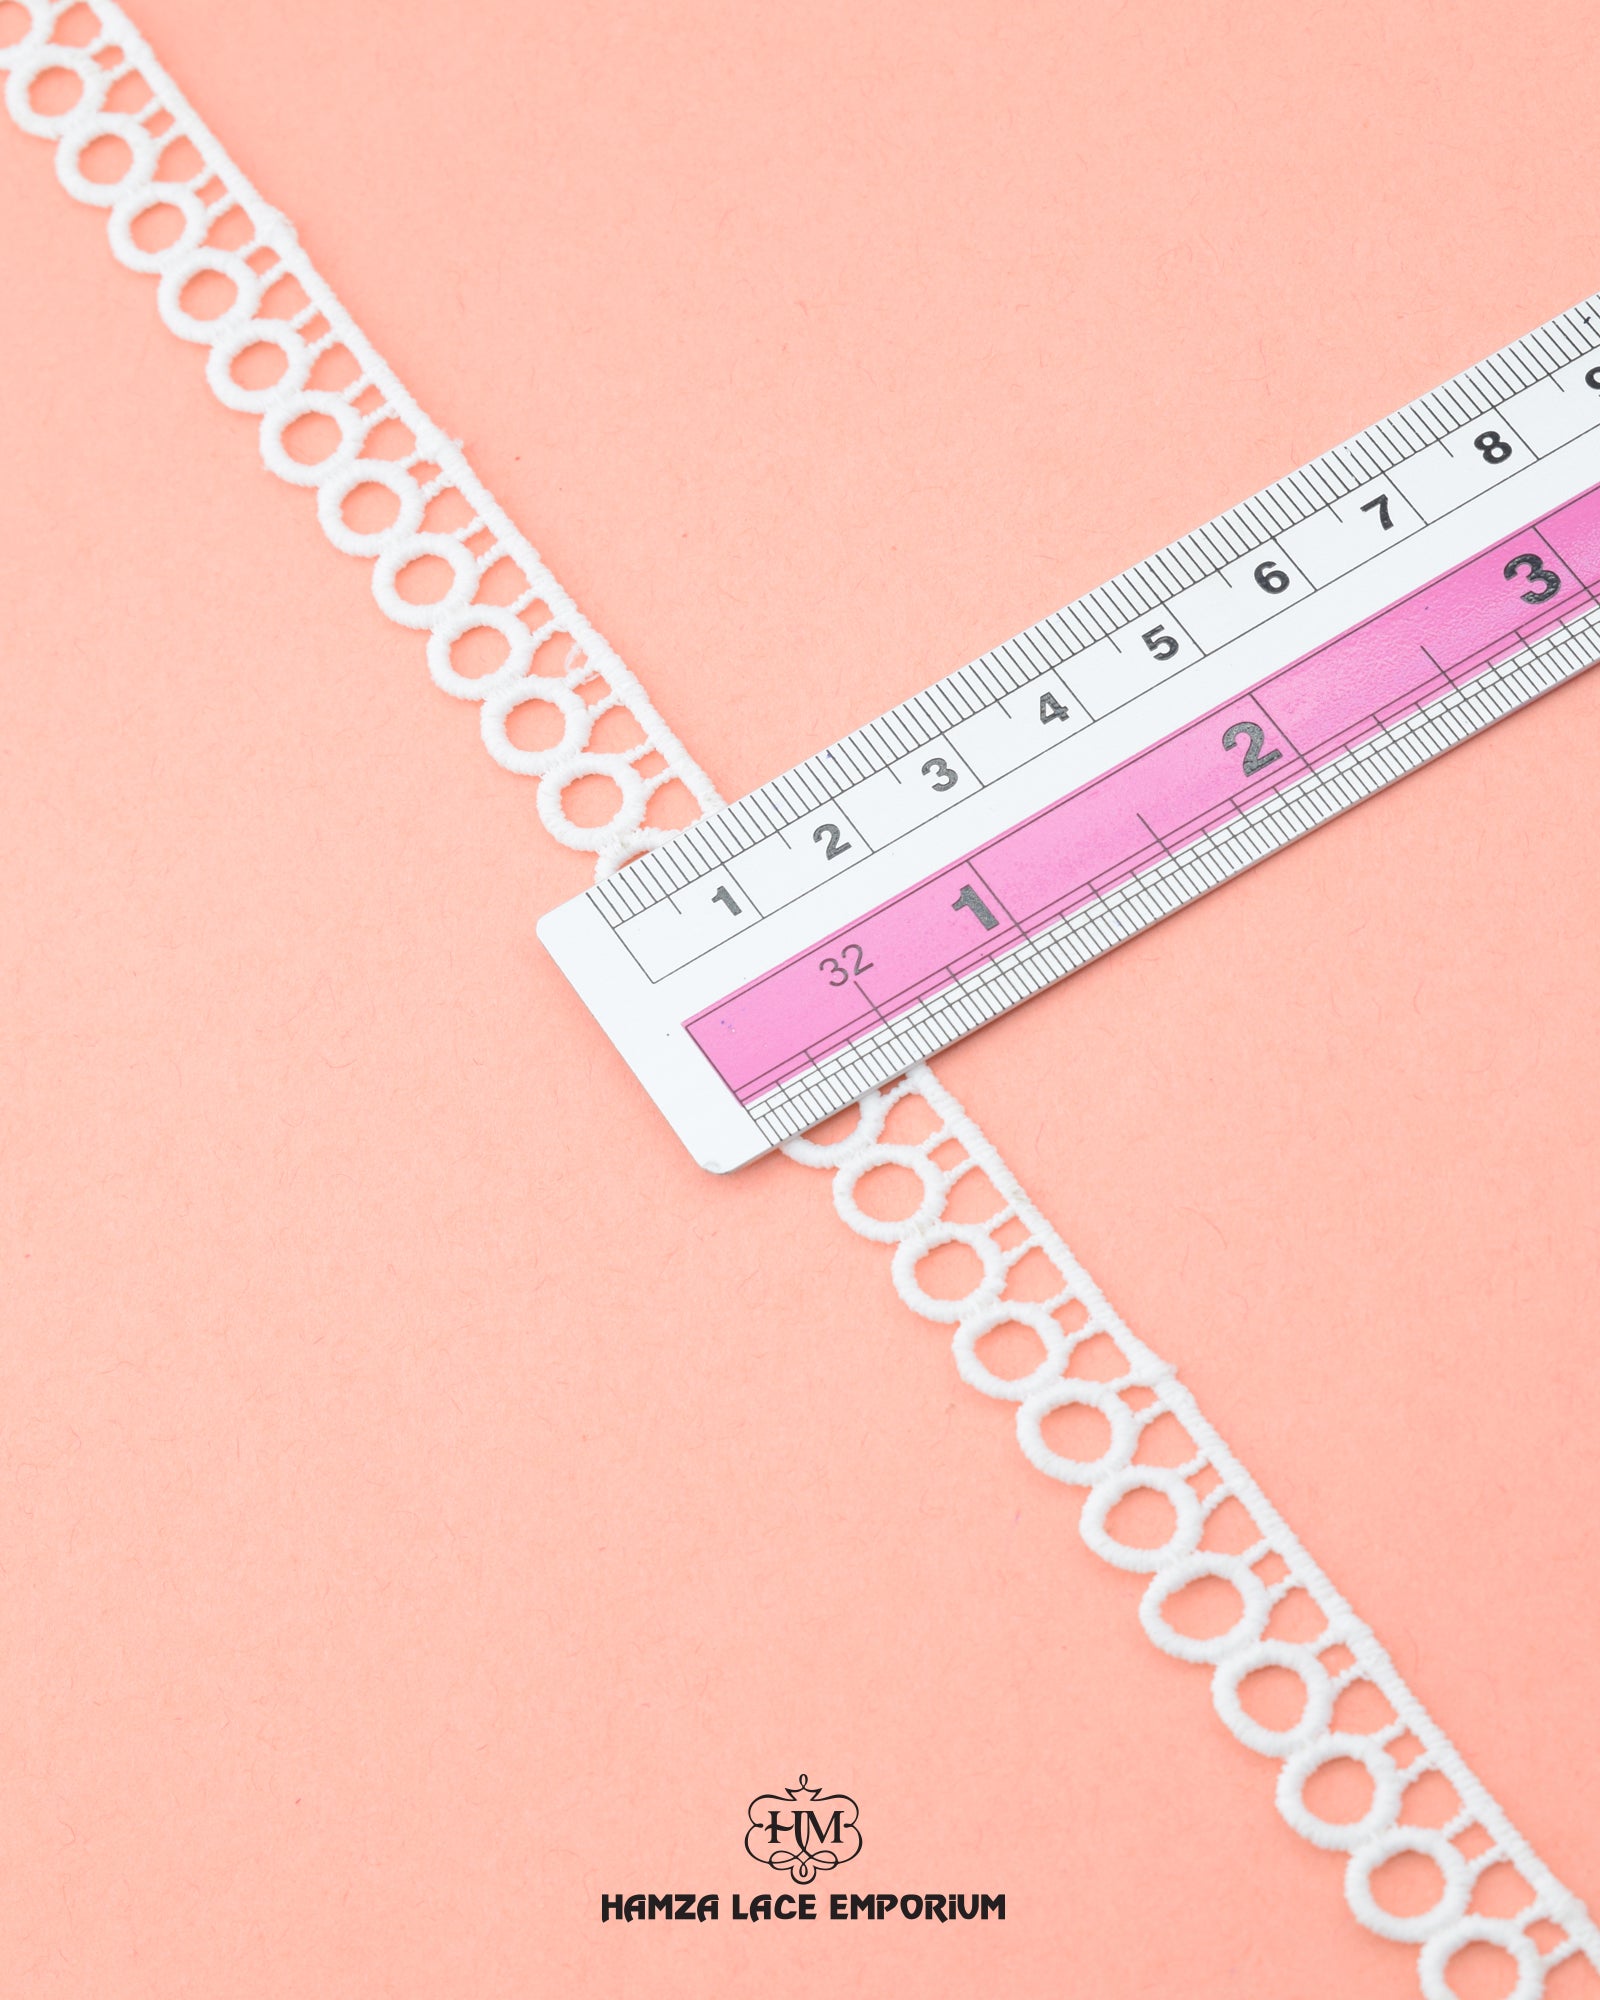 Size of the 'Edging Lace 22859' is given as 0.5 inches with the help of a ruler